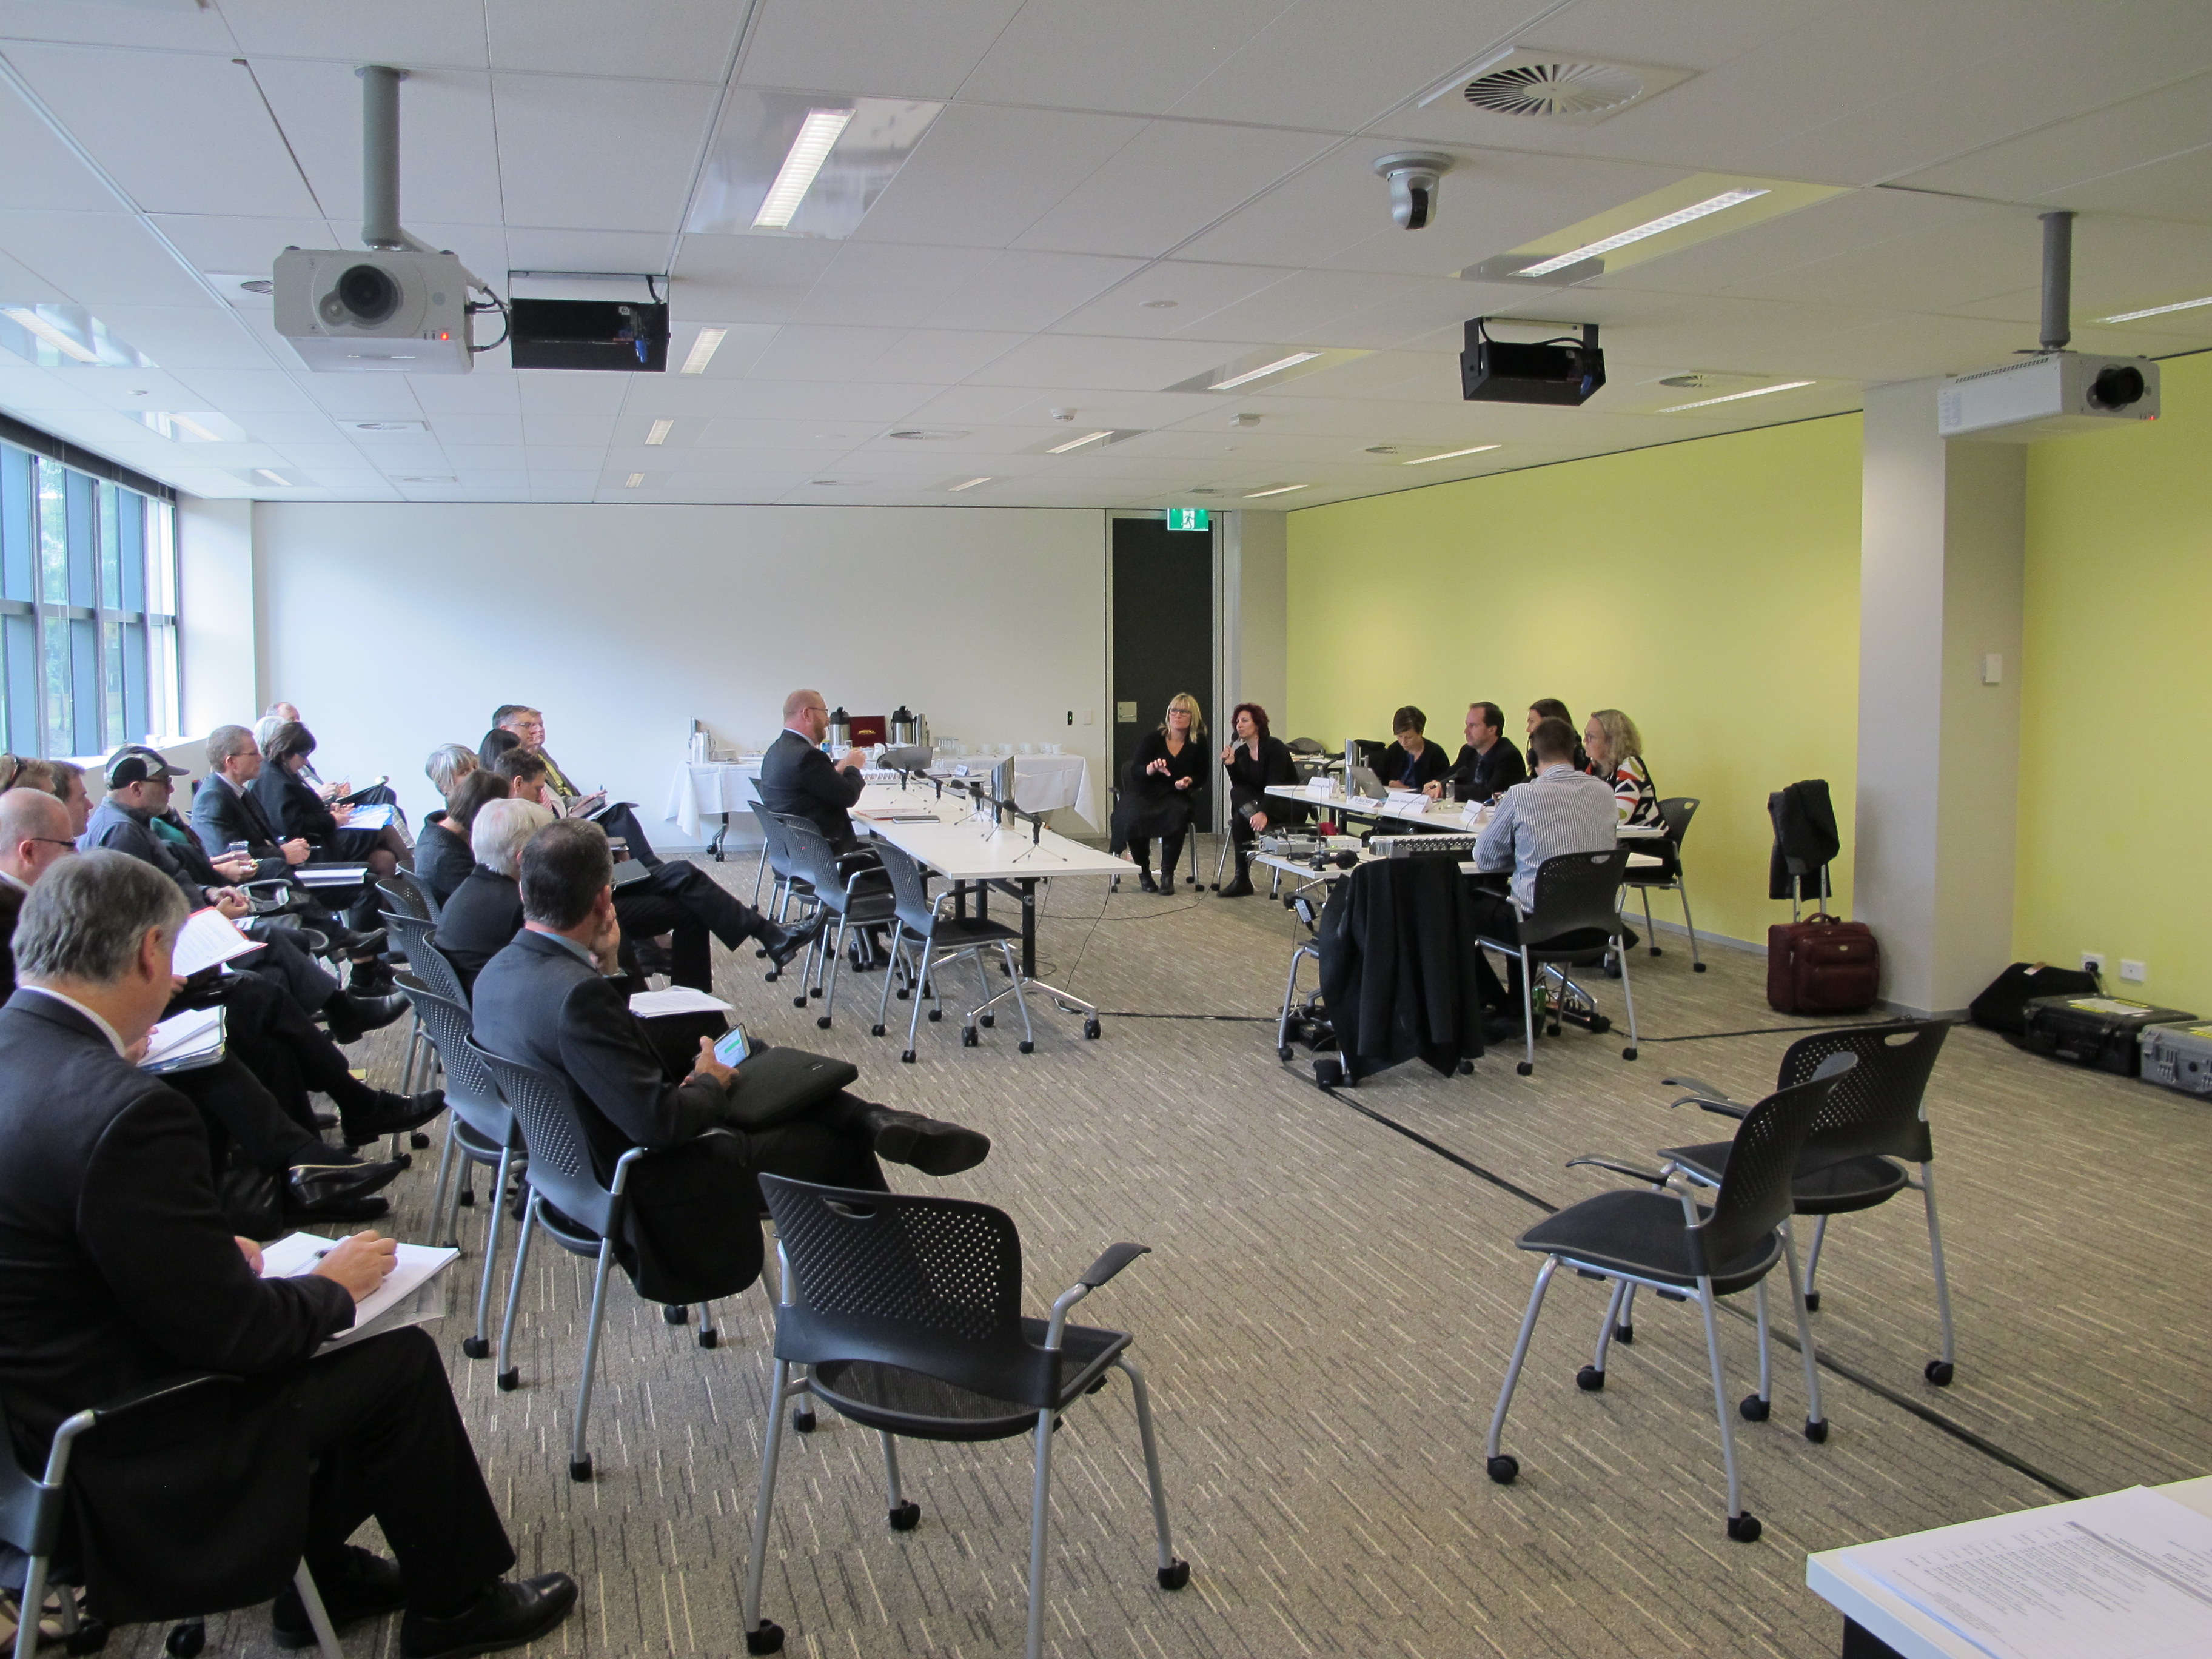 Witness Kyle Miers giving evidence at the hearing, Australian Hearing Hub, Macquarie University, NSW, 10 July 2015.